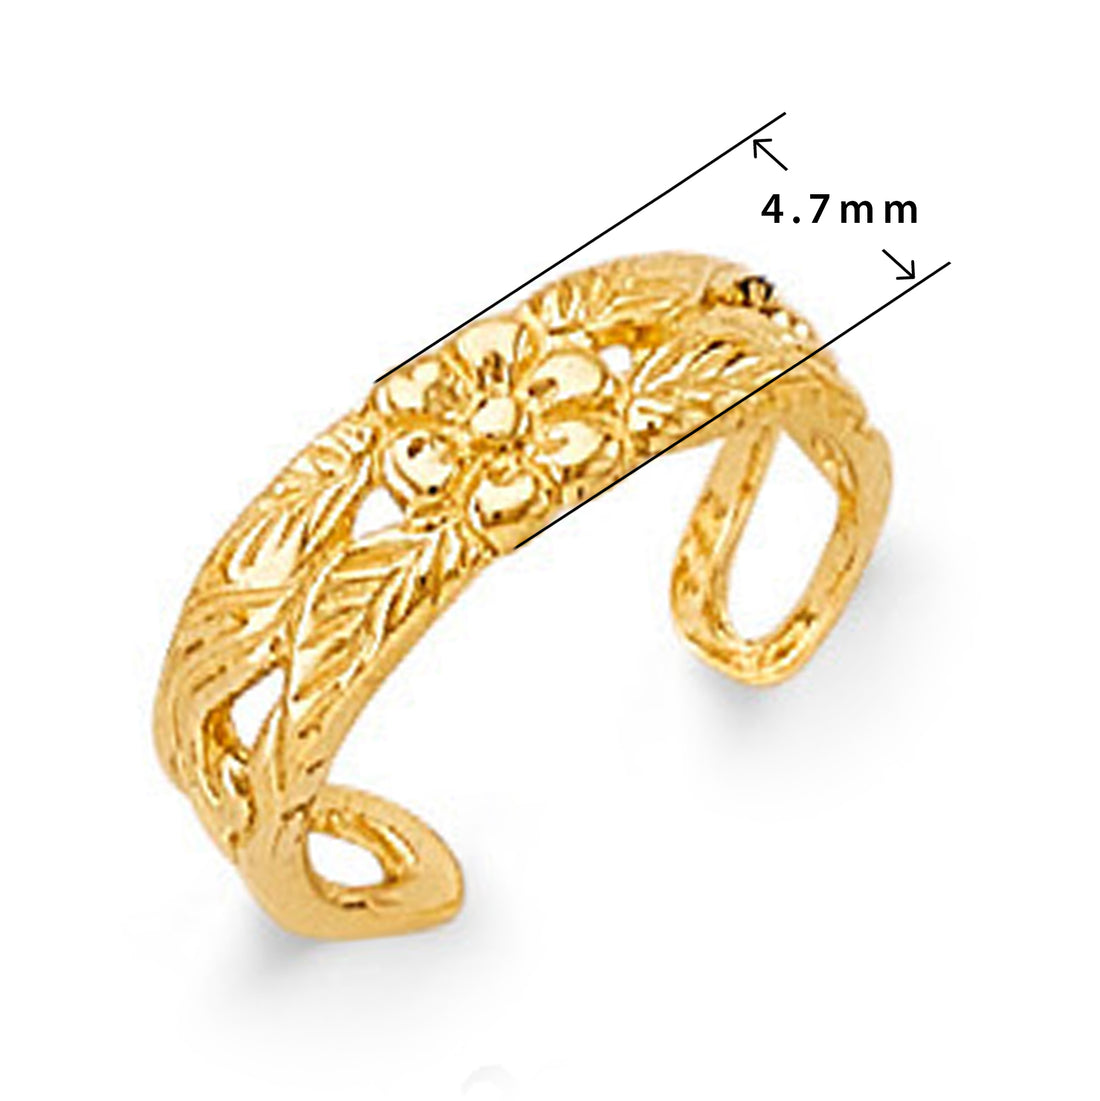 Floral Filler Ring in Solid Gold with Measurement